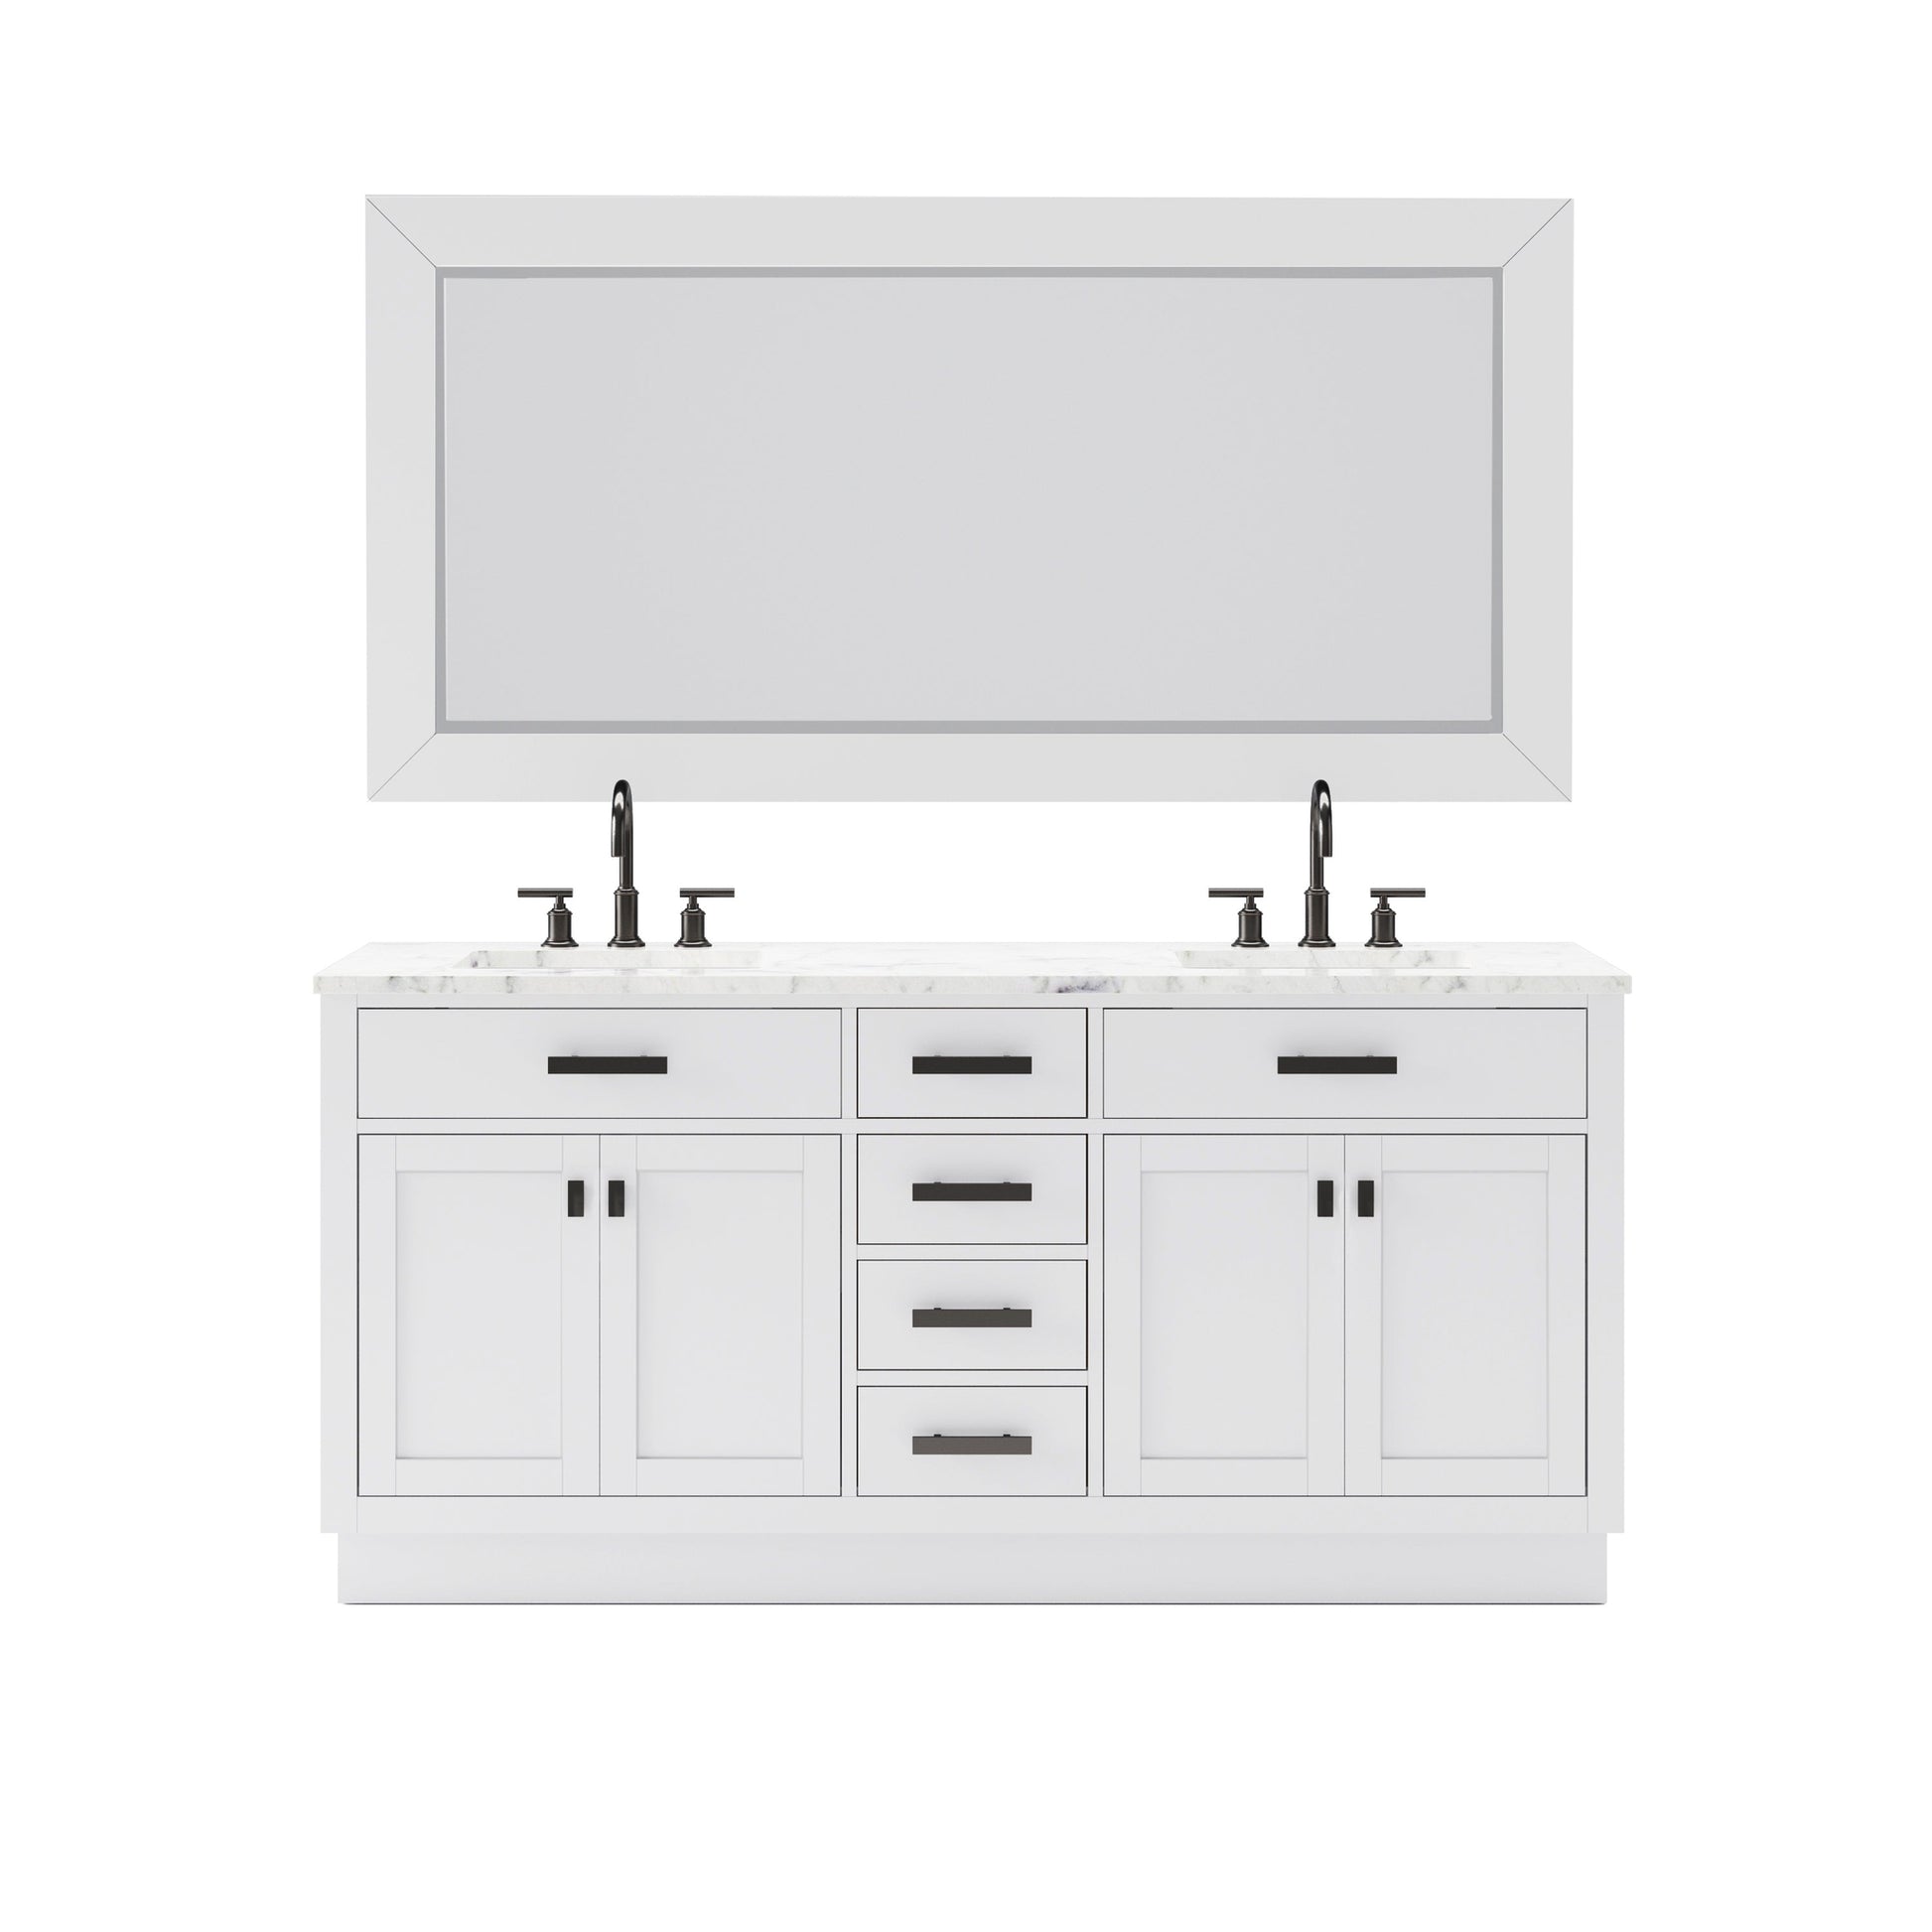 Water Creation Hartford 72" Double Sink Carrara White Marble Countertop Vanity in Pure White with Gooseneck Faucet and Mirror